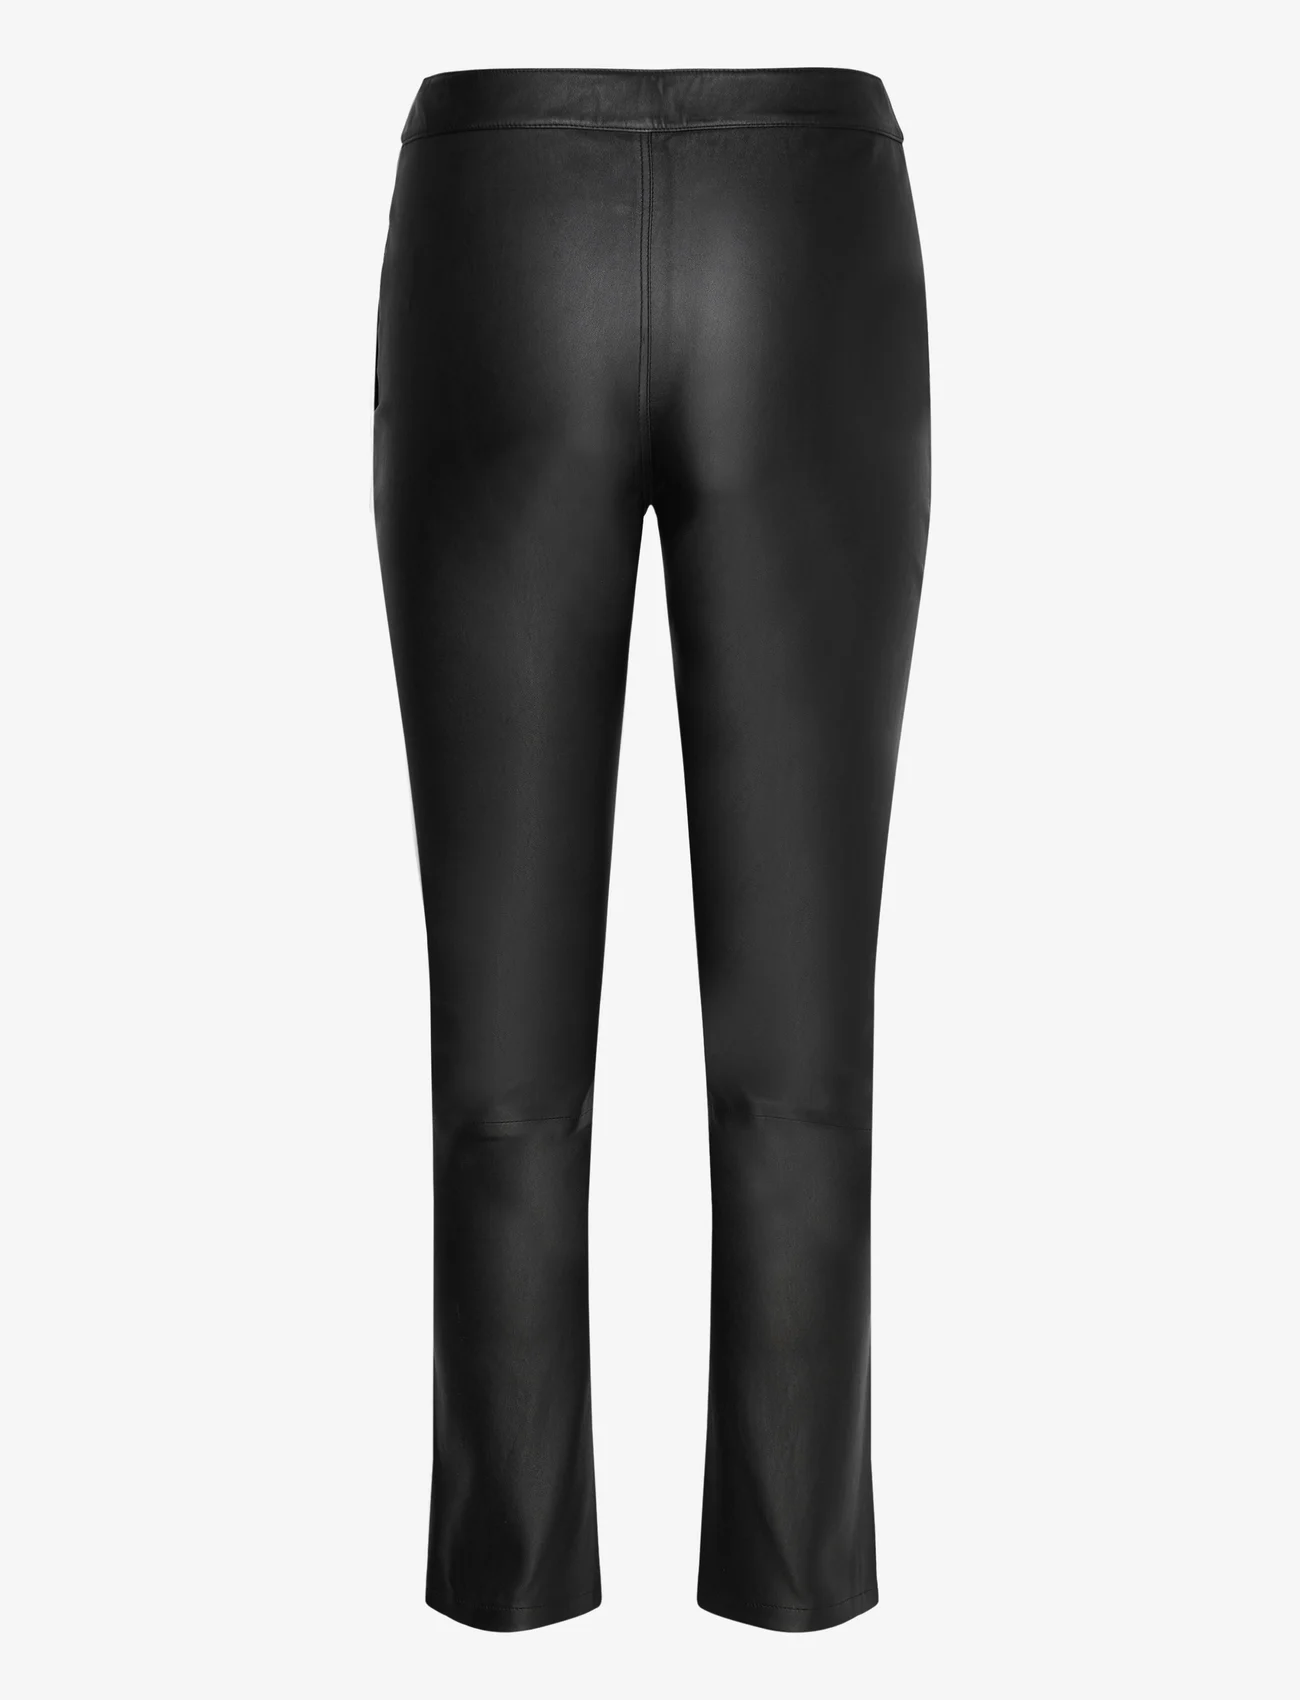 2NDDAY - 2ND Leya - Refined Stretch Leather - leather trousers - meteorite (black) - 1